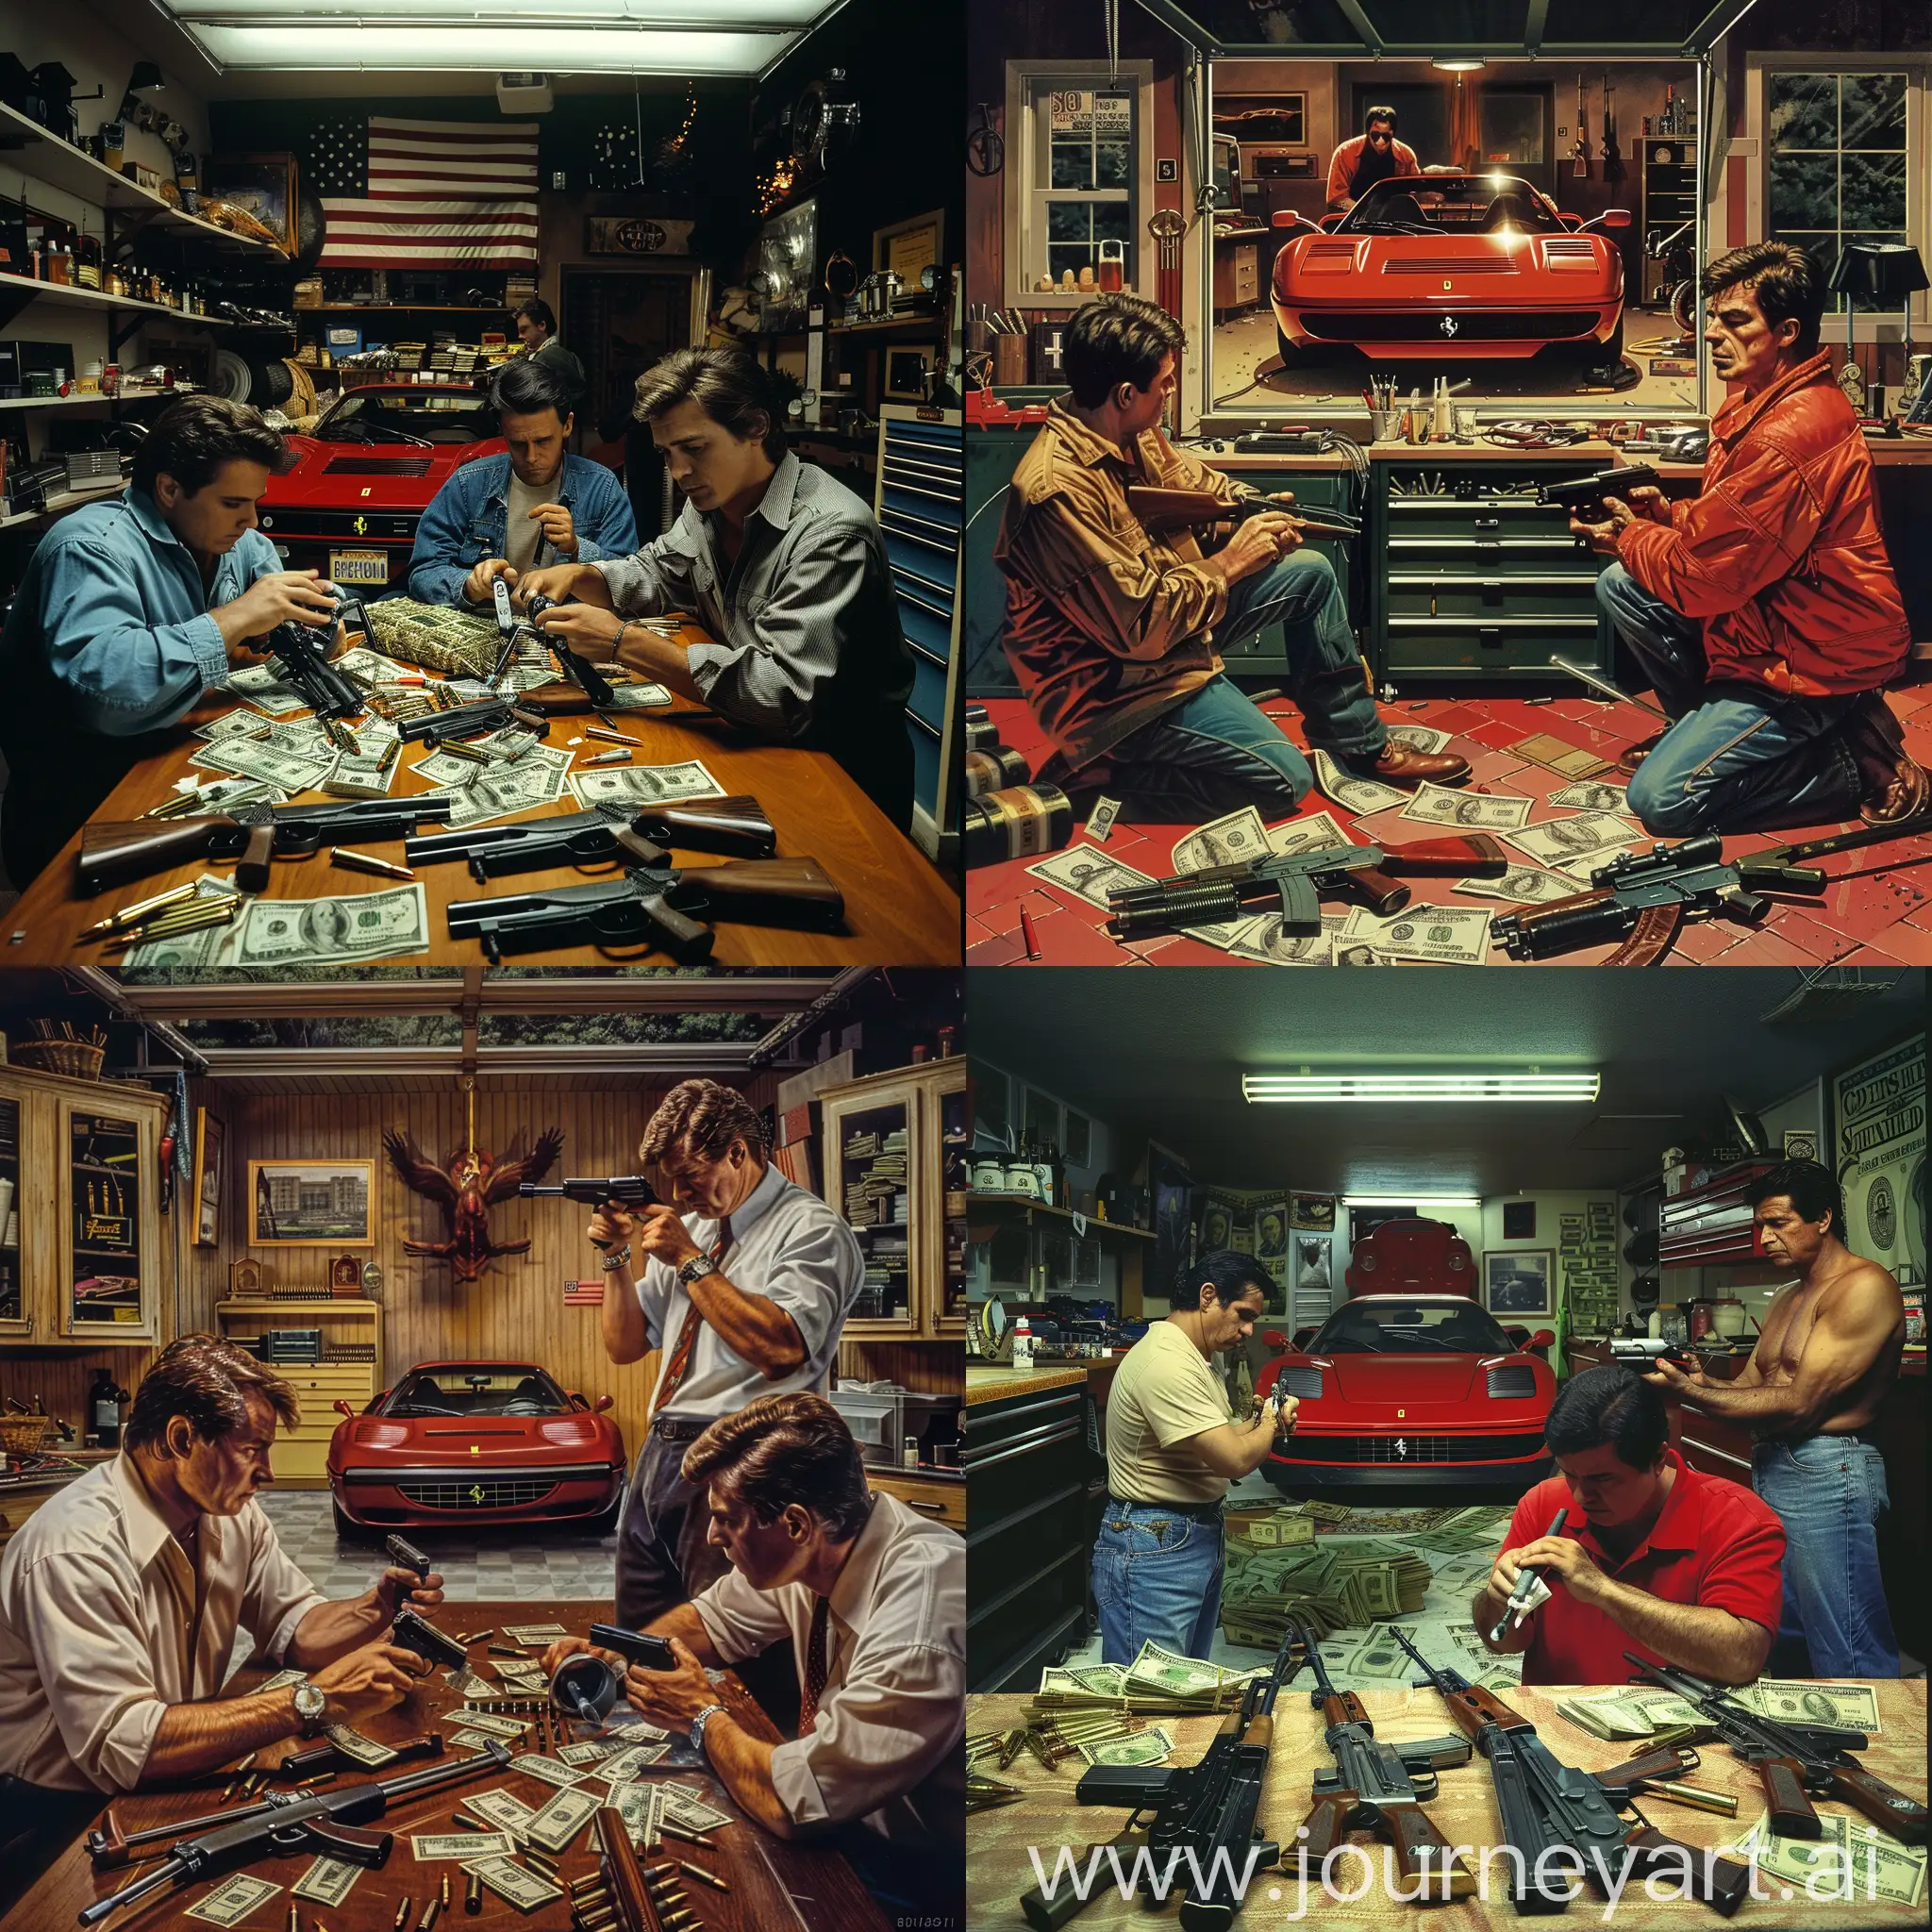 A man in 1980 in his garage have a ferrari in the back he and his two mens are cleaning guns and in front of them alot of money